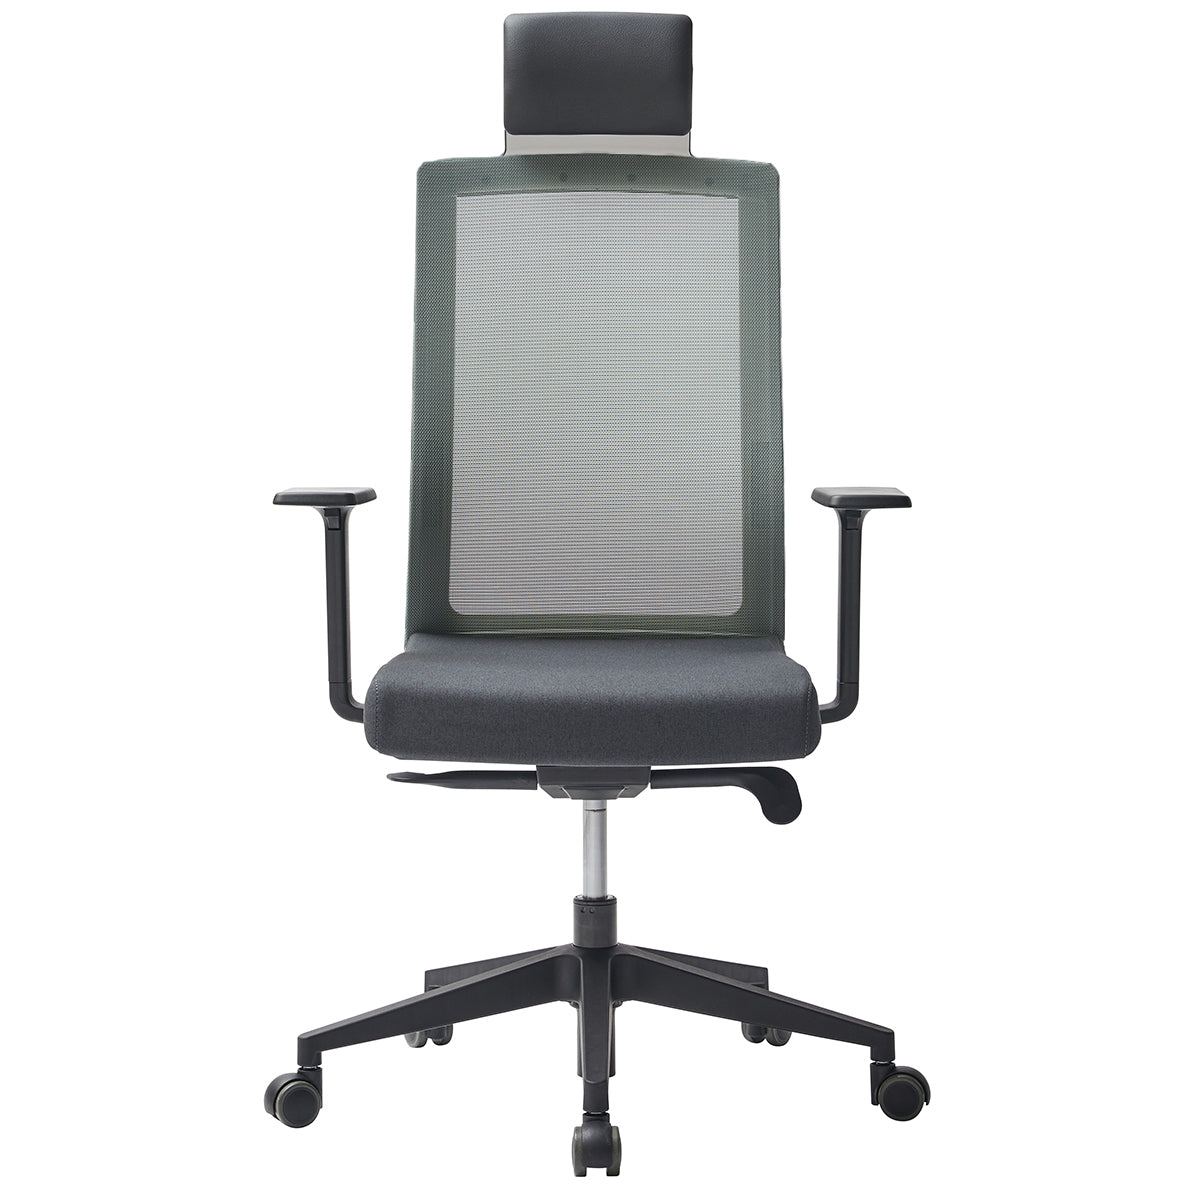 DUOREST Duoflex Square Office Home Ergonomic Mesh Office Chair, Black Frame